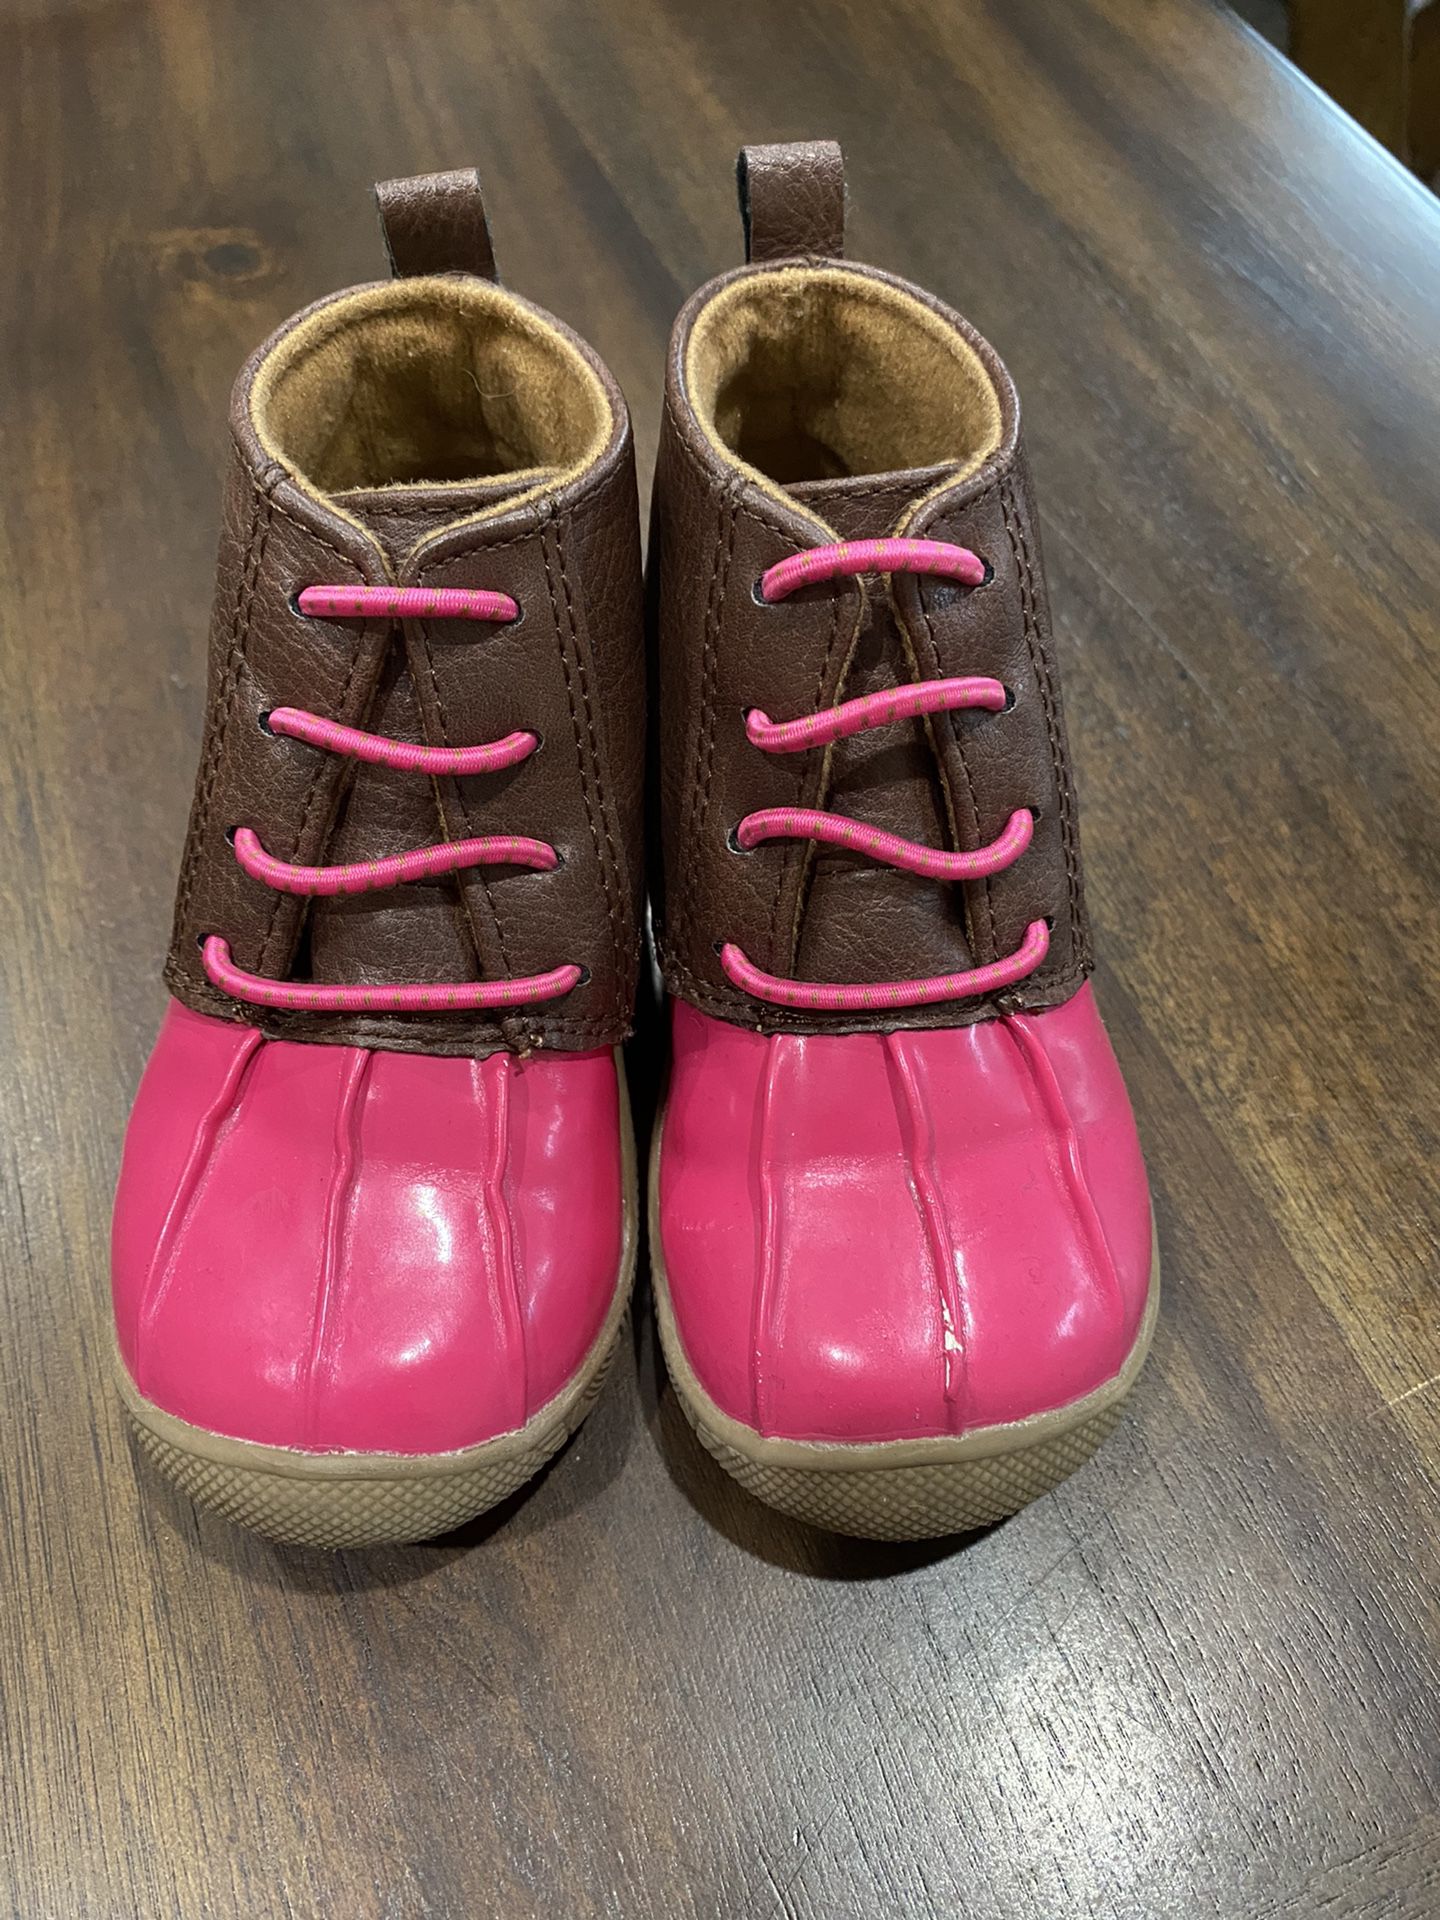 Babygirl Leather Snow Boots 